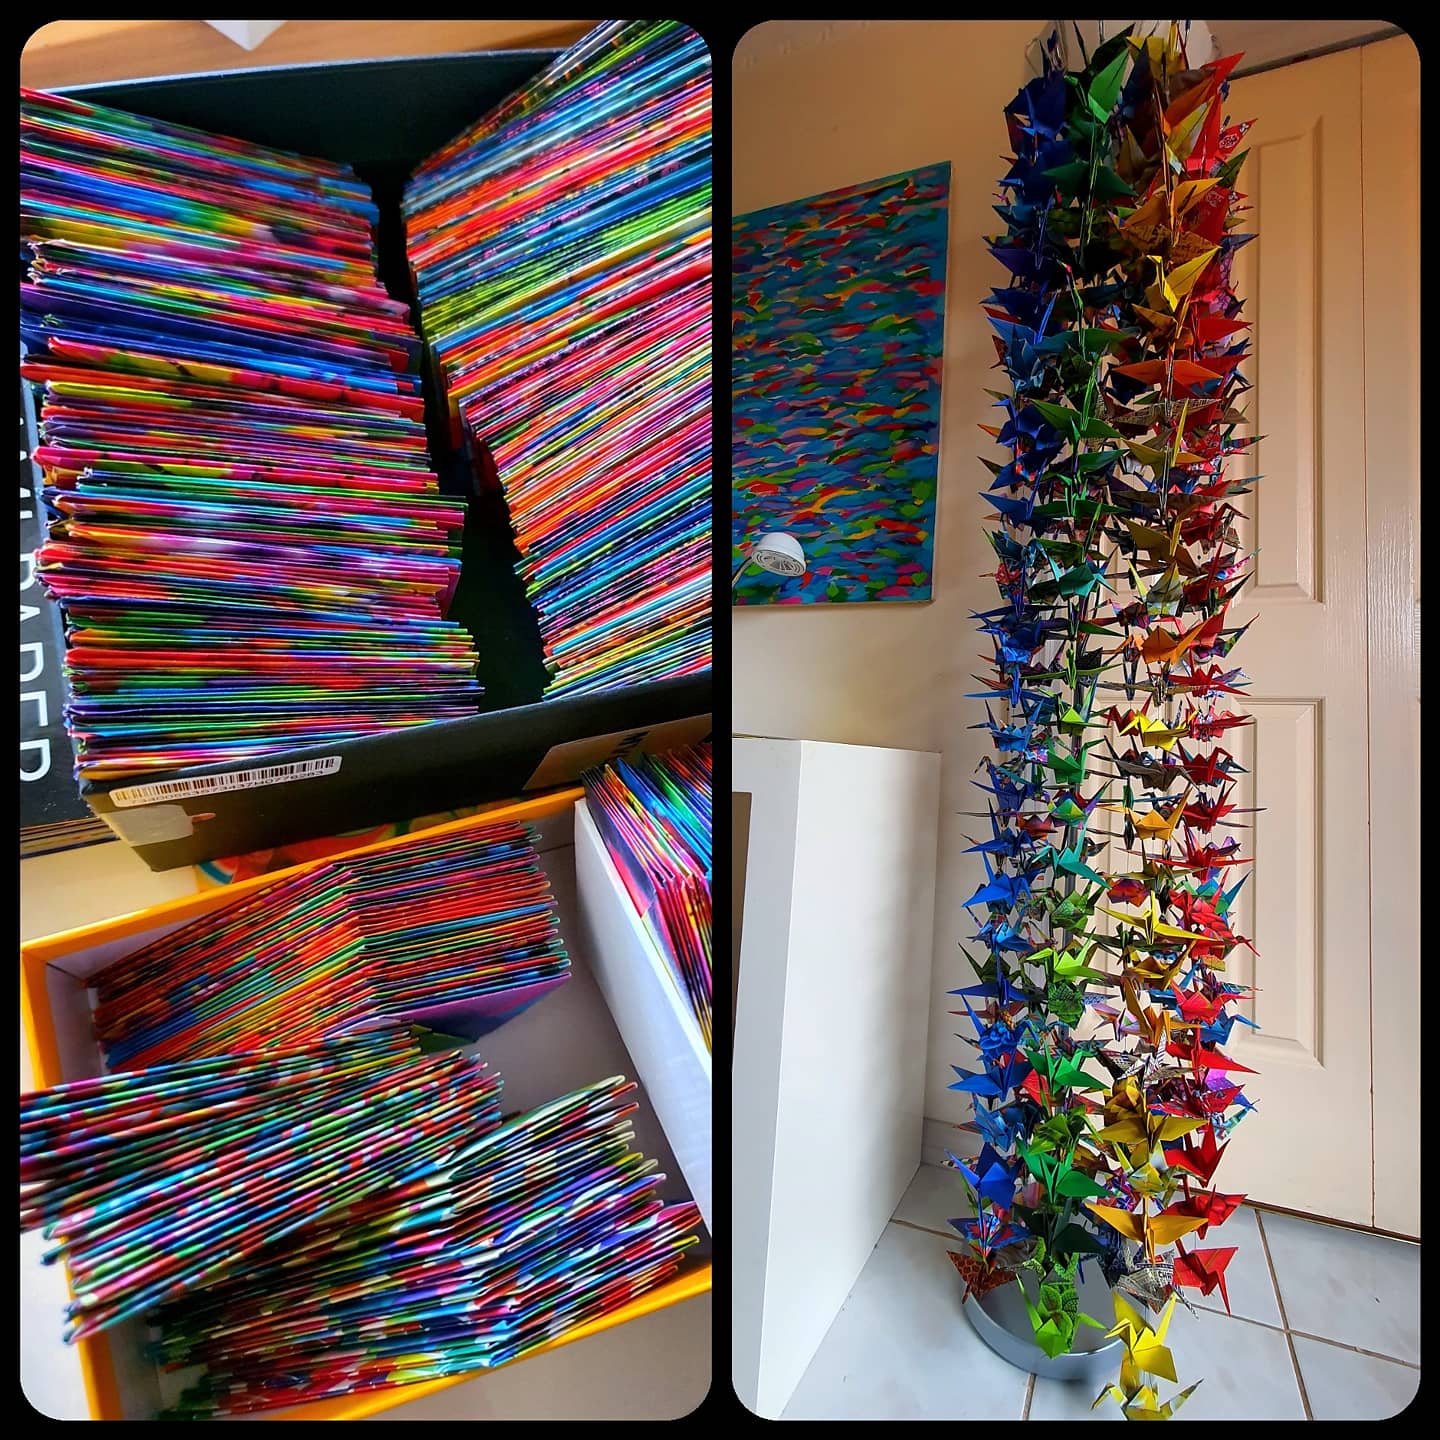 Colour paper cranned folded in a box and one large strand hanging from a ceiling.